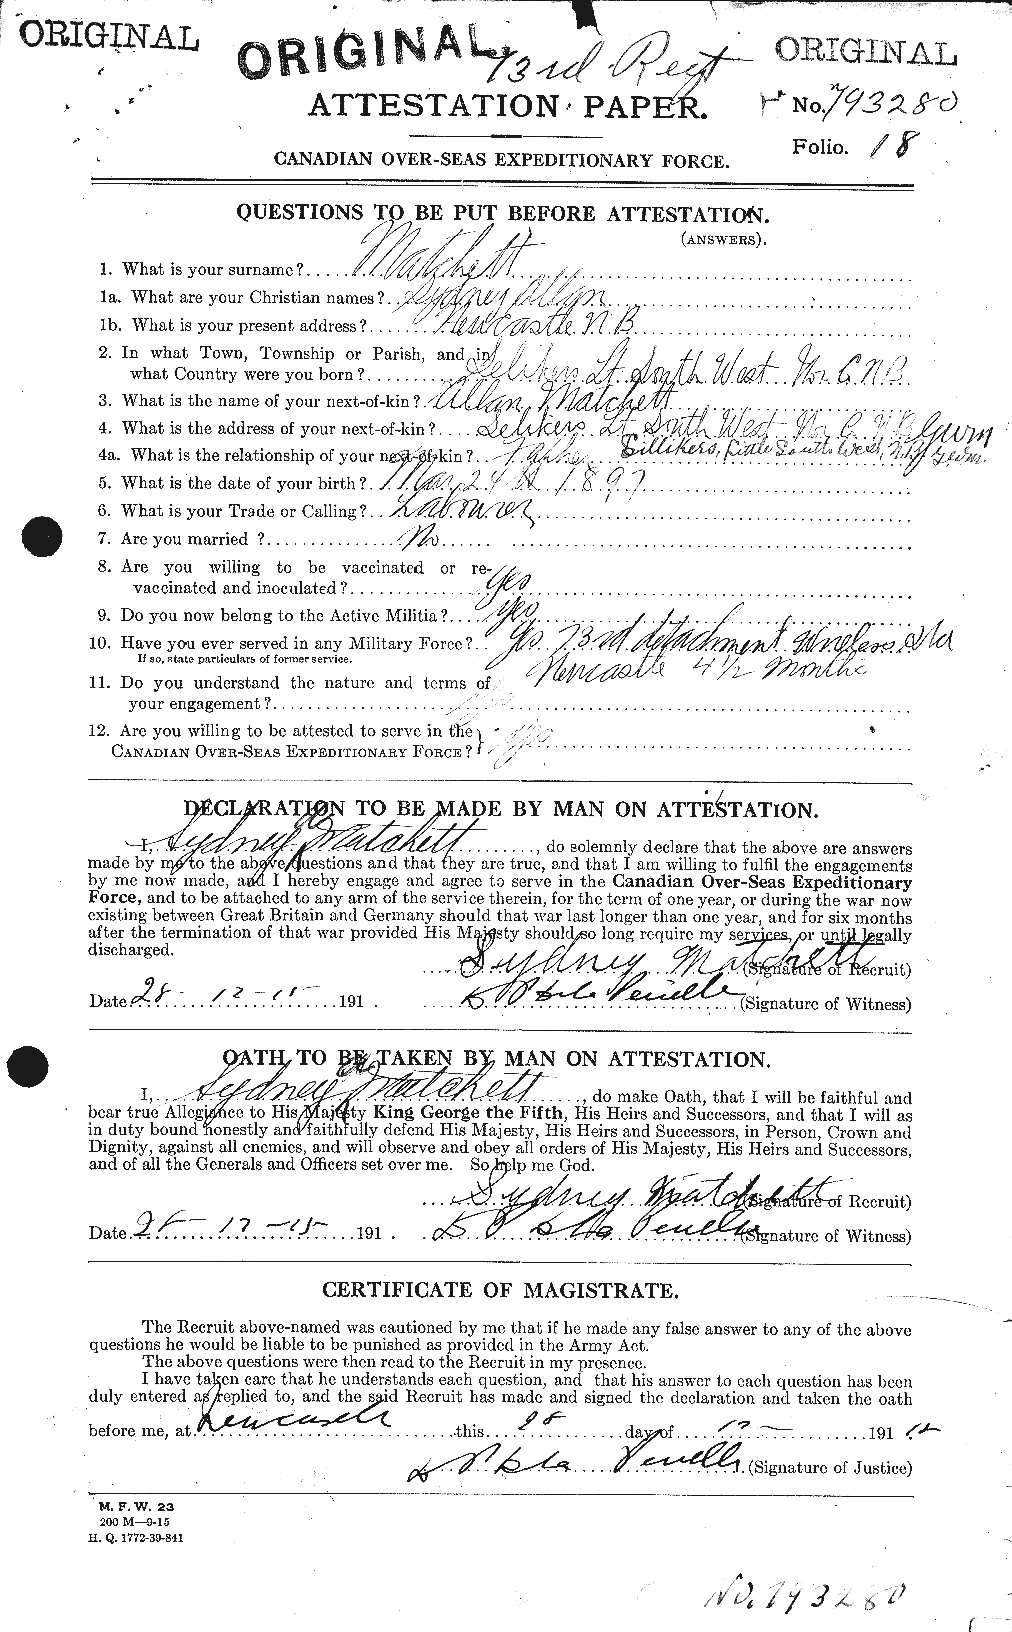 Personnel Records of the First World War - CEF 488593a